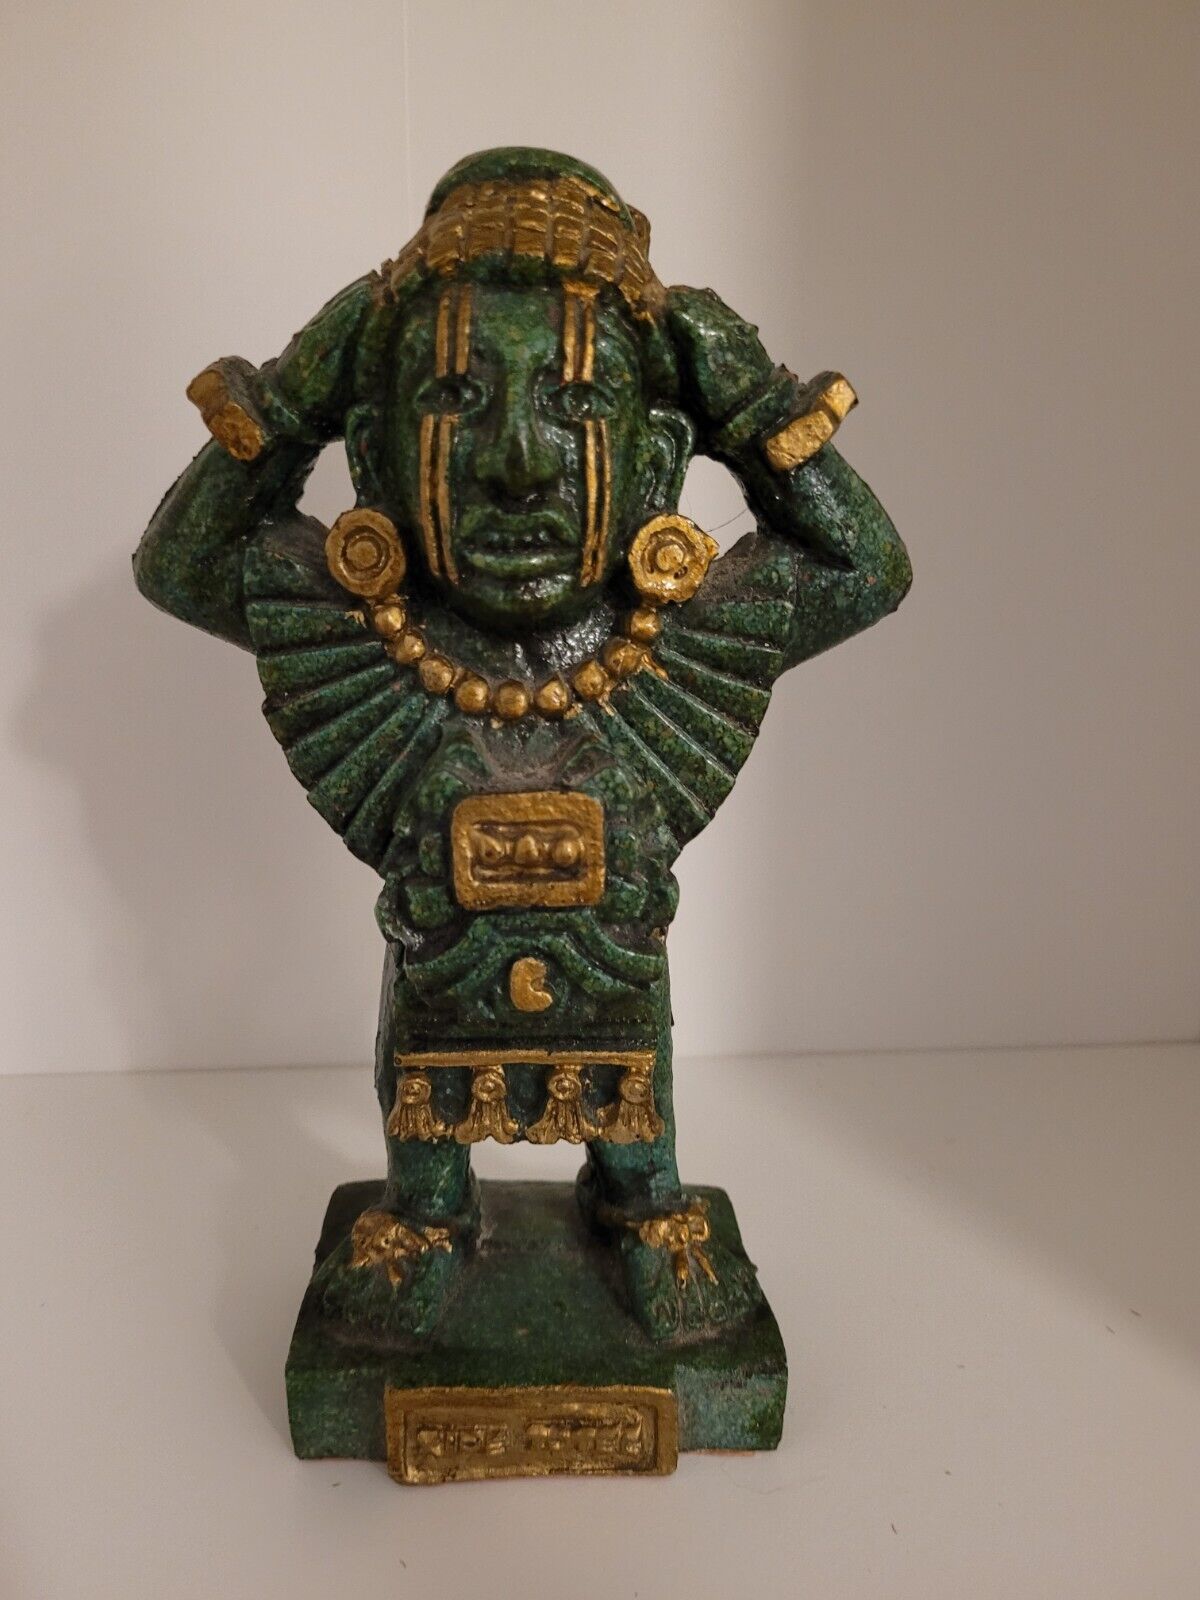 Vintage Aztec Xipe Totec Warrior God Statue Sculpture Crushed Green Stone Mexico